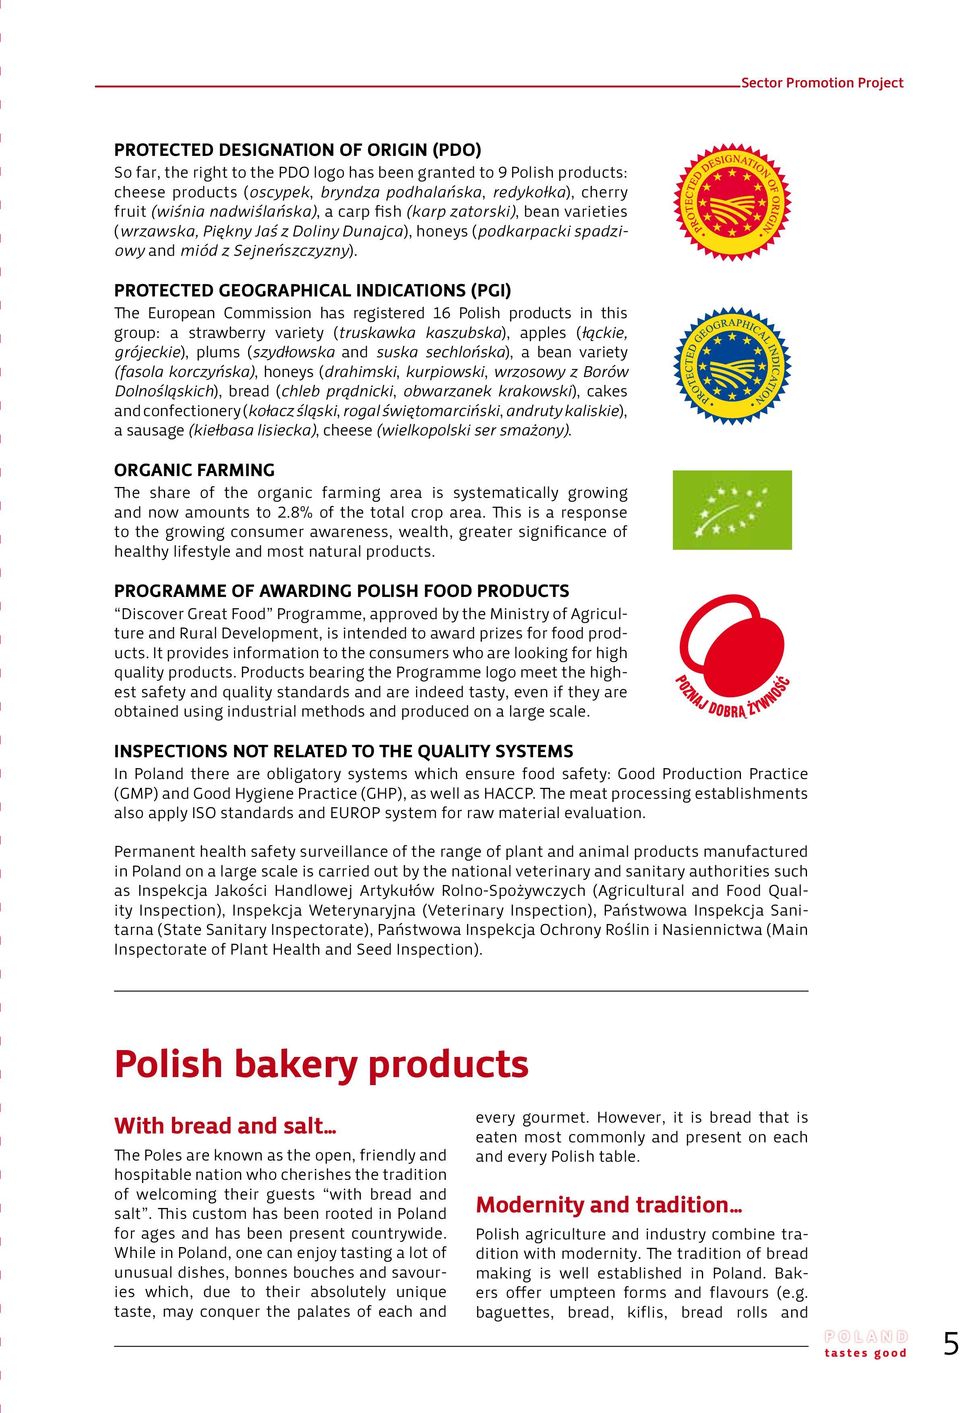 PROTECTED GEOGRAPHICAL INDICATIONS (PGI) The European Commission has registered 16 Polish products in this group: a strawberry variety (truskawka kaszubska), apples (łąckie, grójeckie), plums